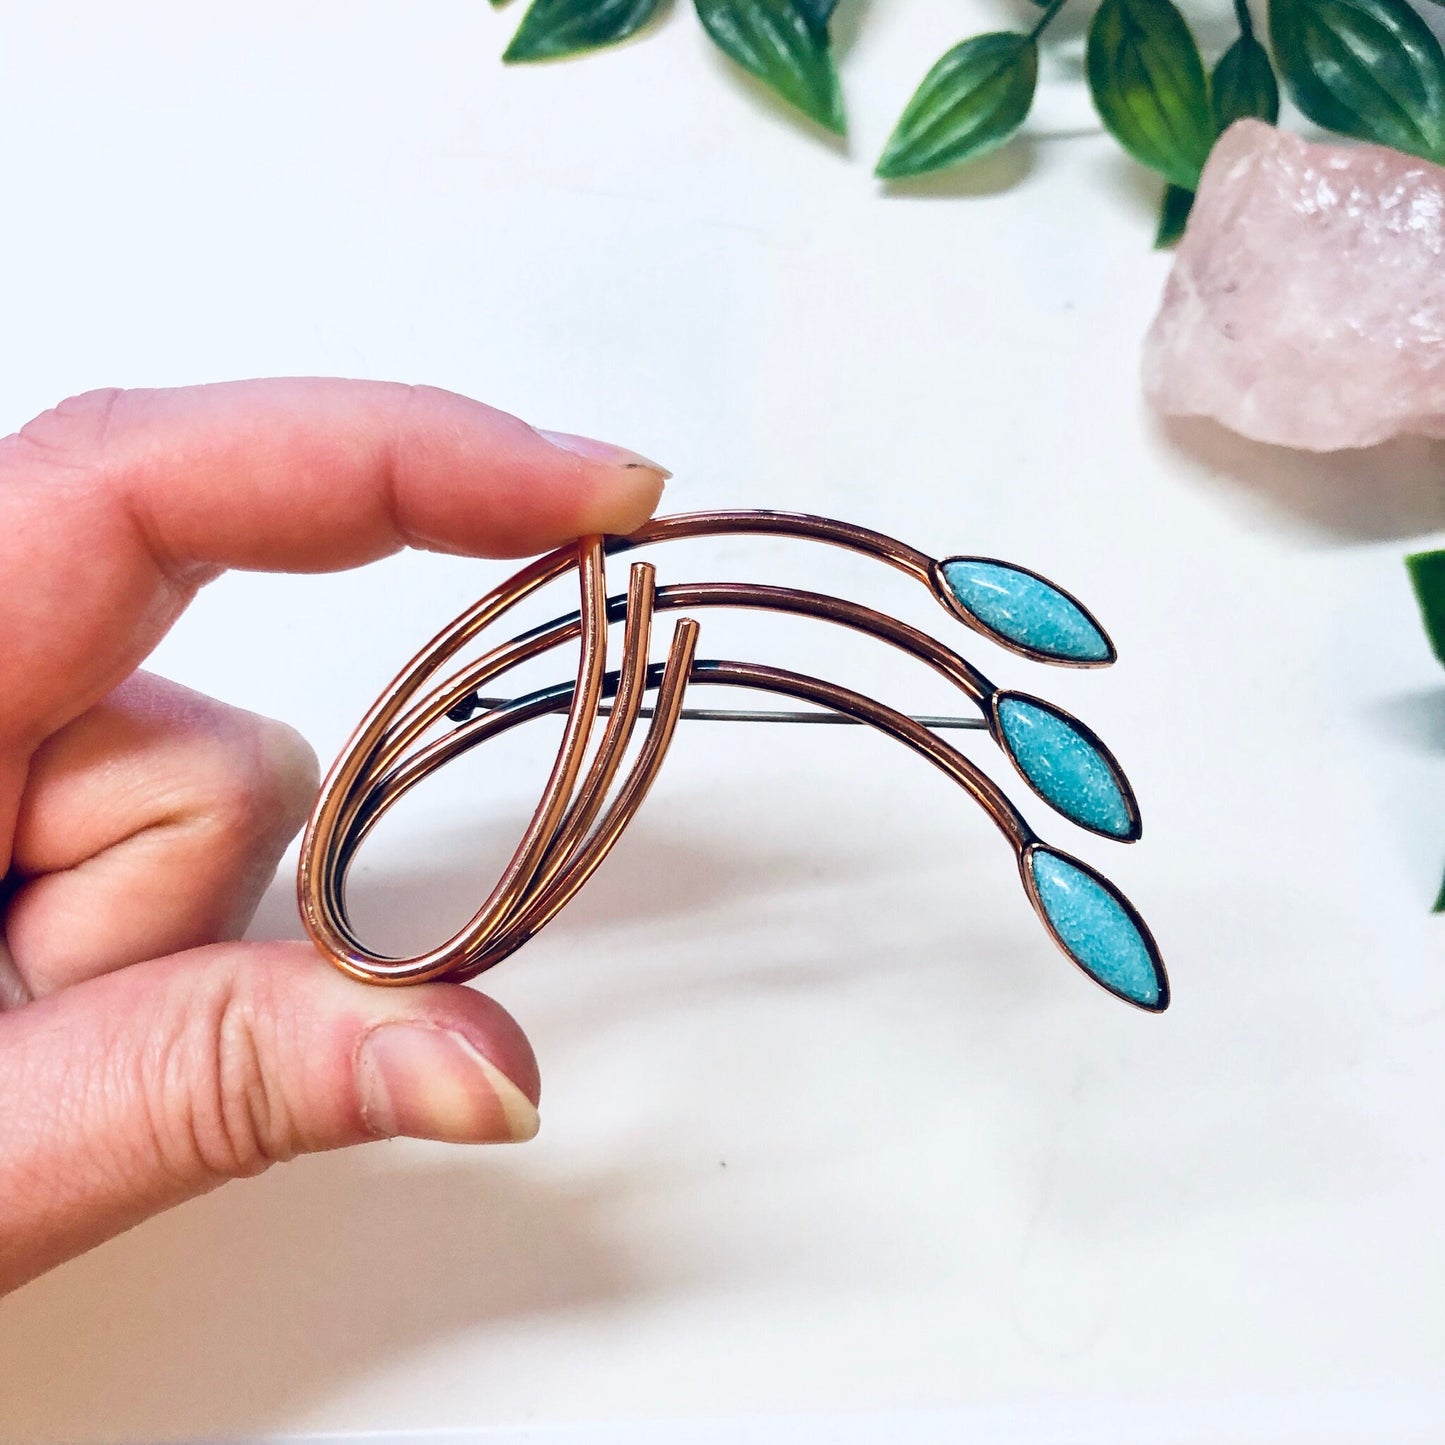 Copper and turquoise vintage Matisse Renoir brooch pin held in hand with decorative leaves and rose quartz crystal in background.